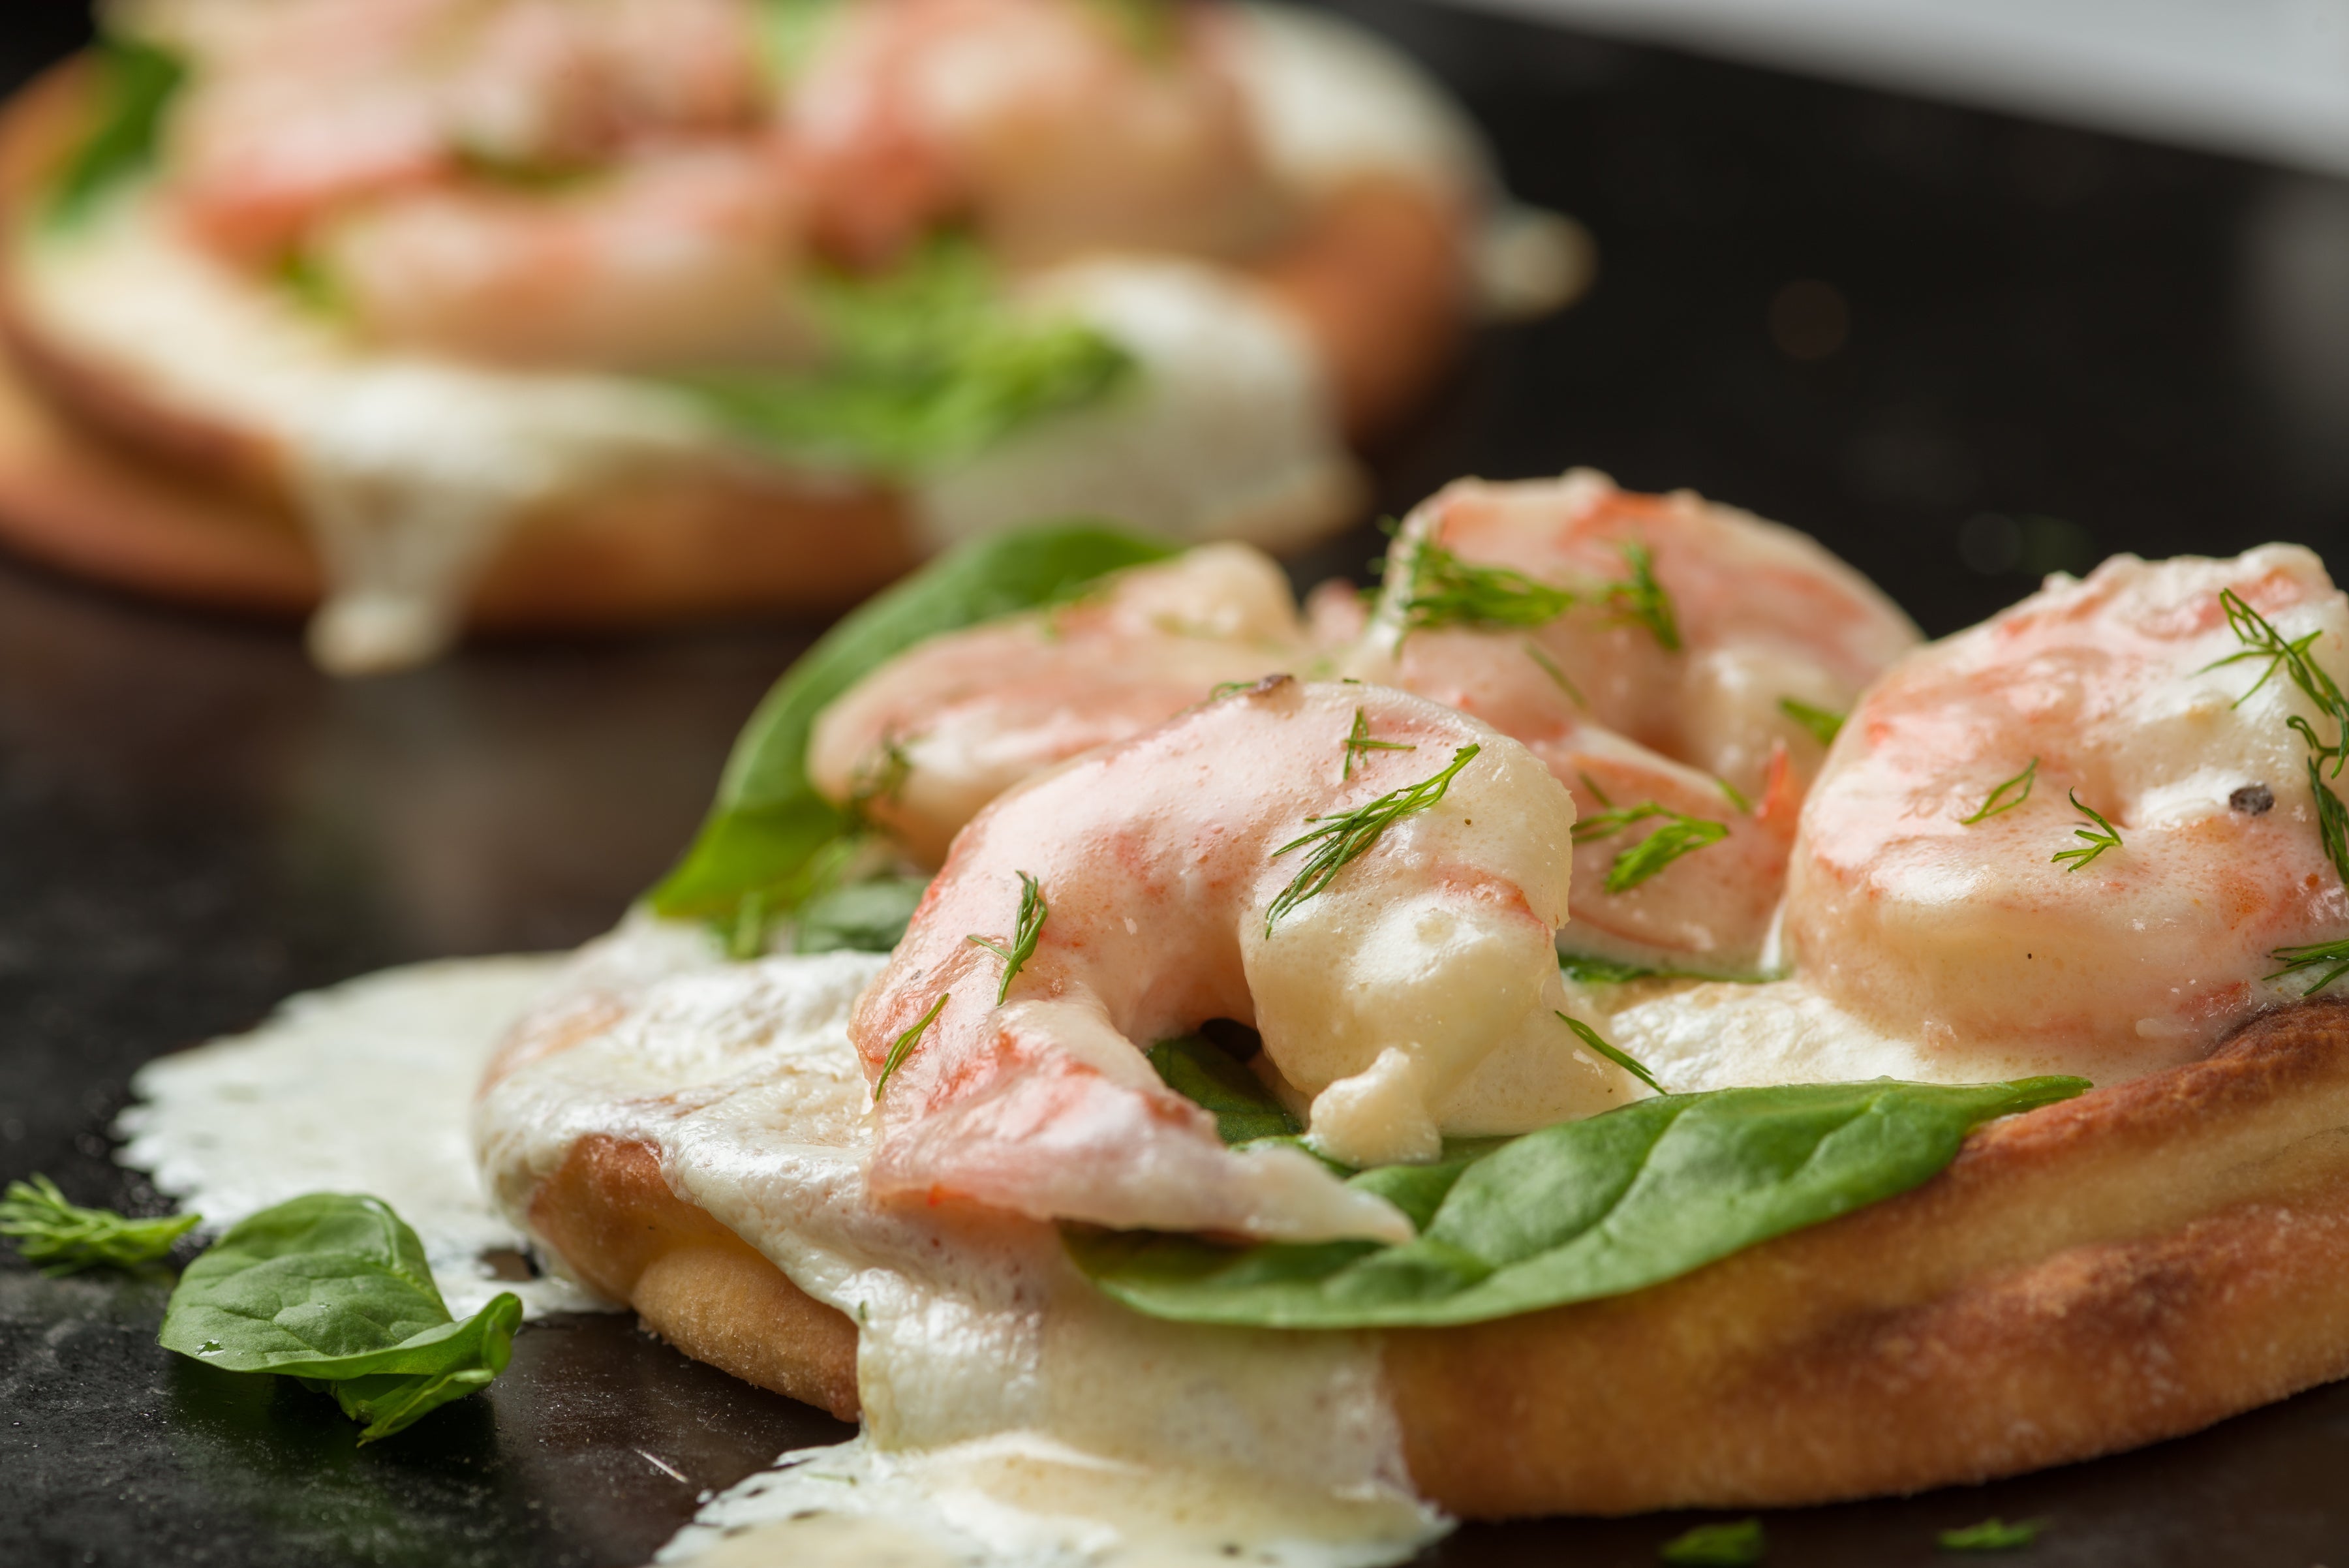 Shrimp and Spinach Naan - Prime Shrimp